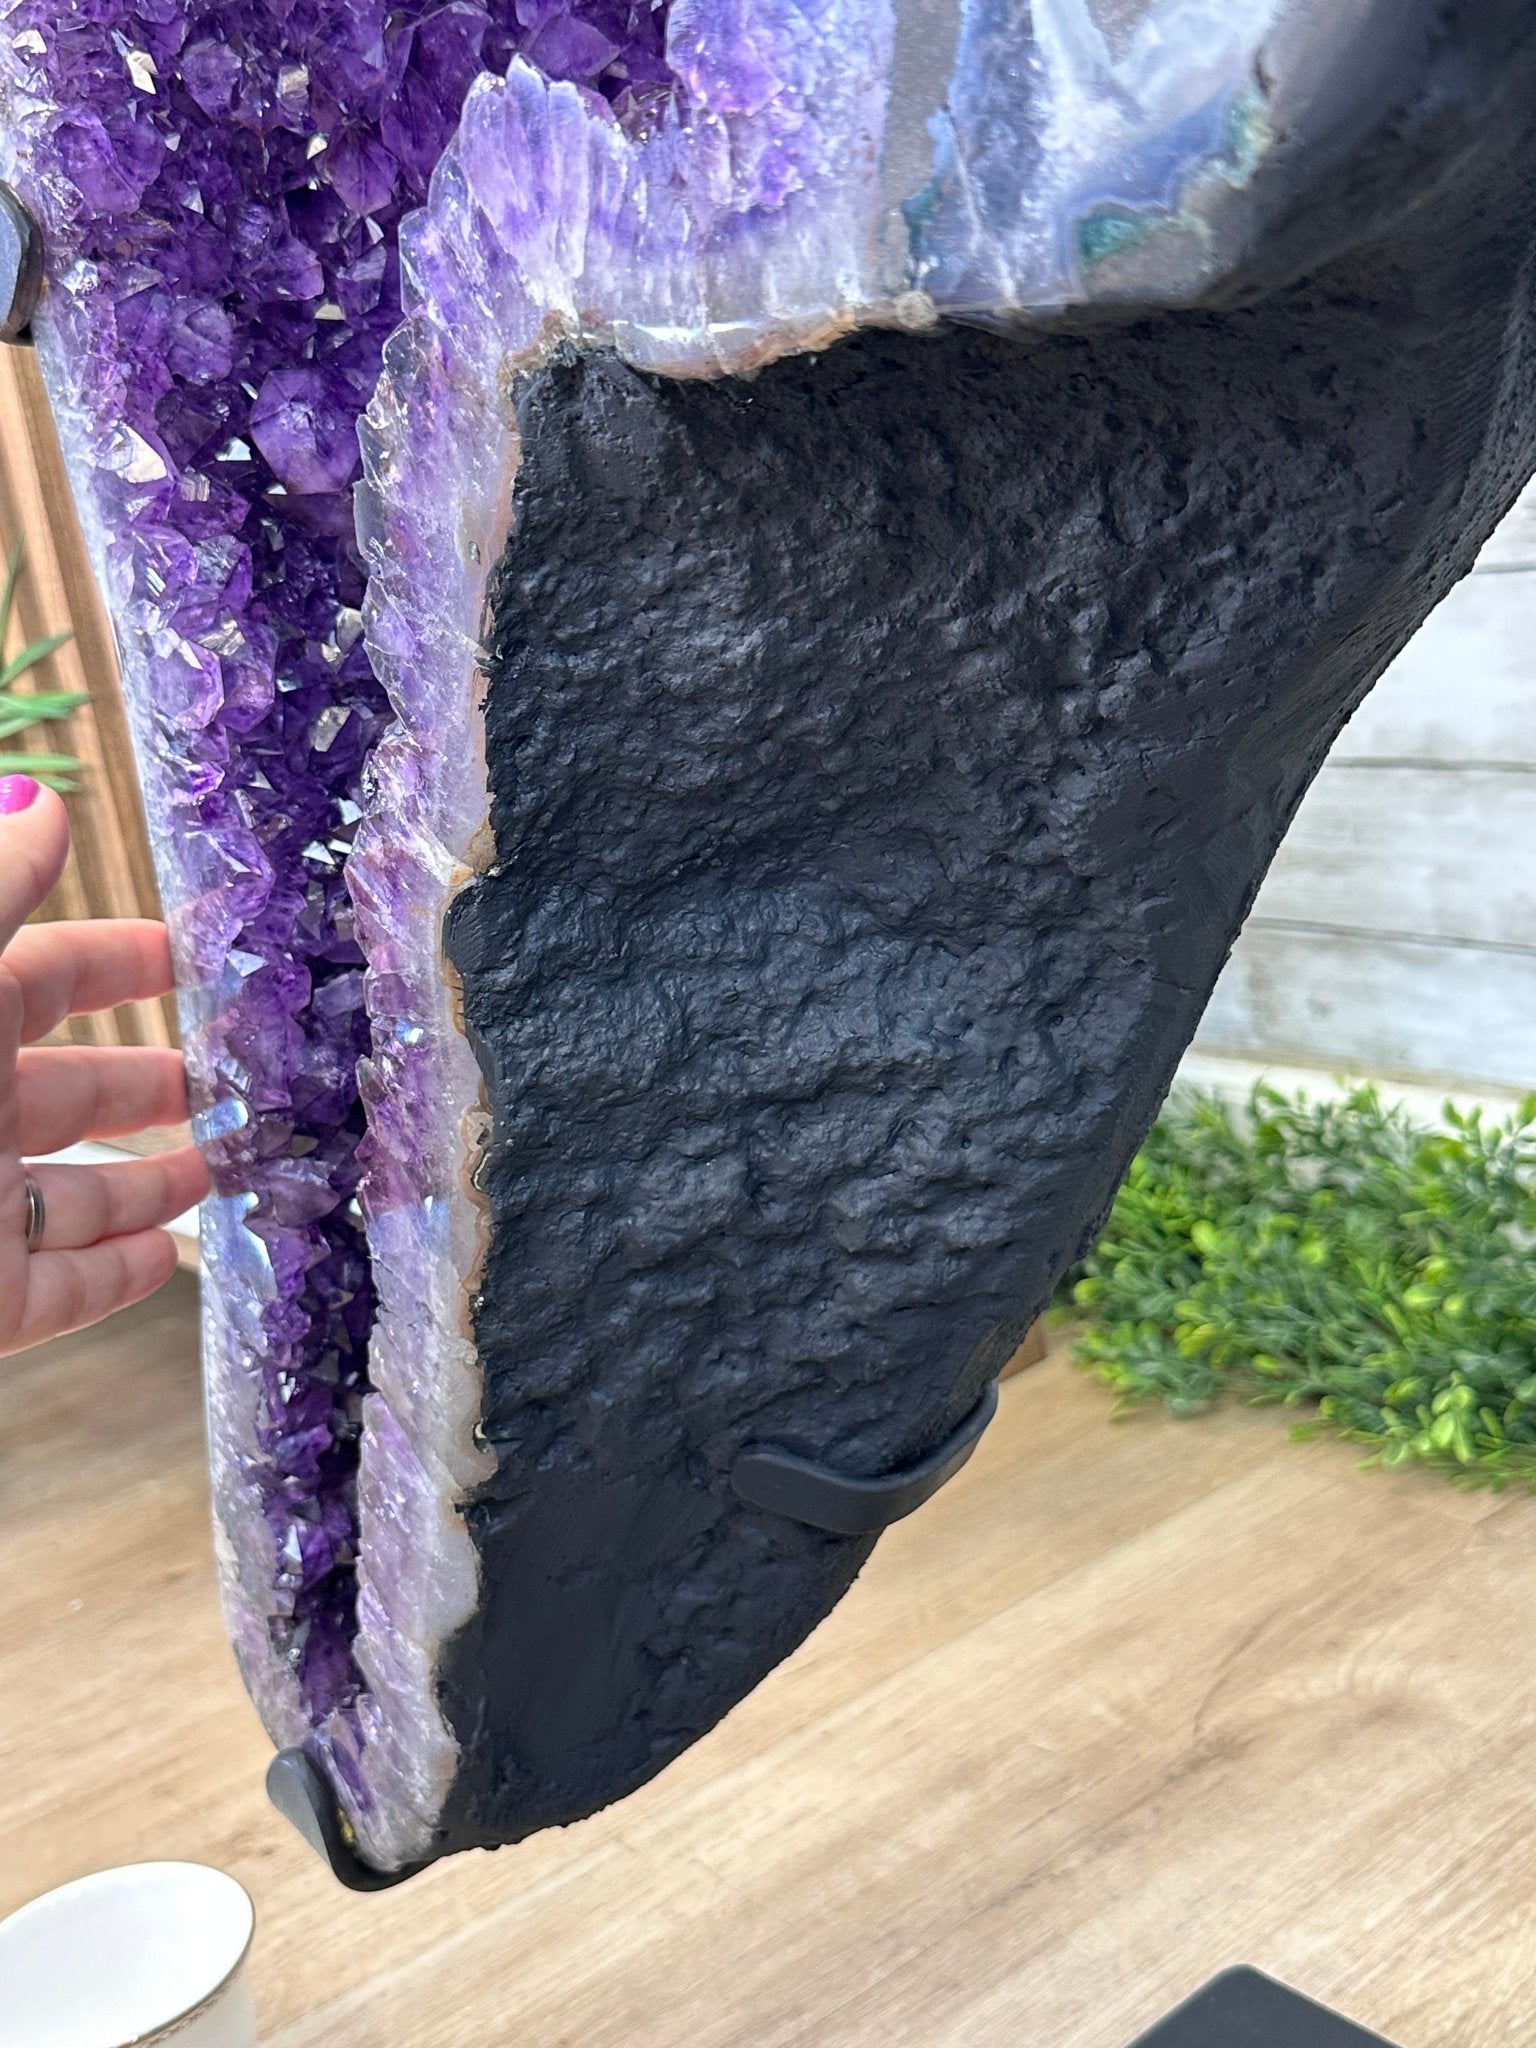 Extra Plus Quality Amethyst Wings on a Metal Stand, 178 lbs, 36" Tall #5493-0040 - Brazil GemsBrazil GemsExtra Plus Quality Amethyst Wings on a Metal Stand, 178 lbs, 36" Tall #5493-0040Amethyst Butterfly Wings5493-0040